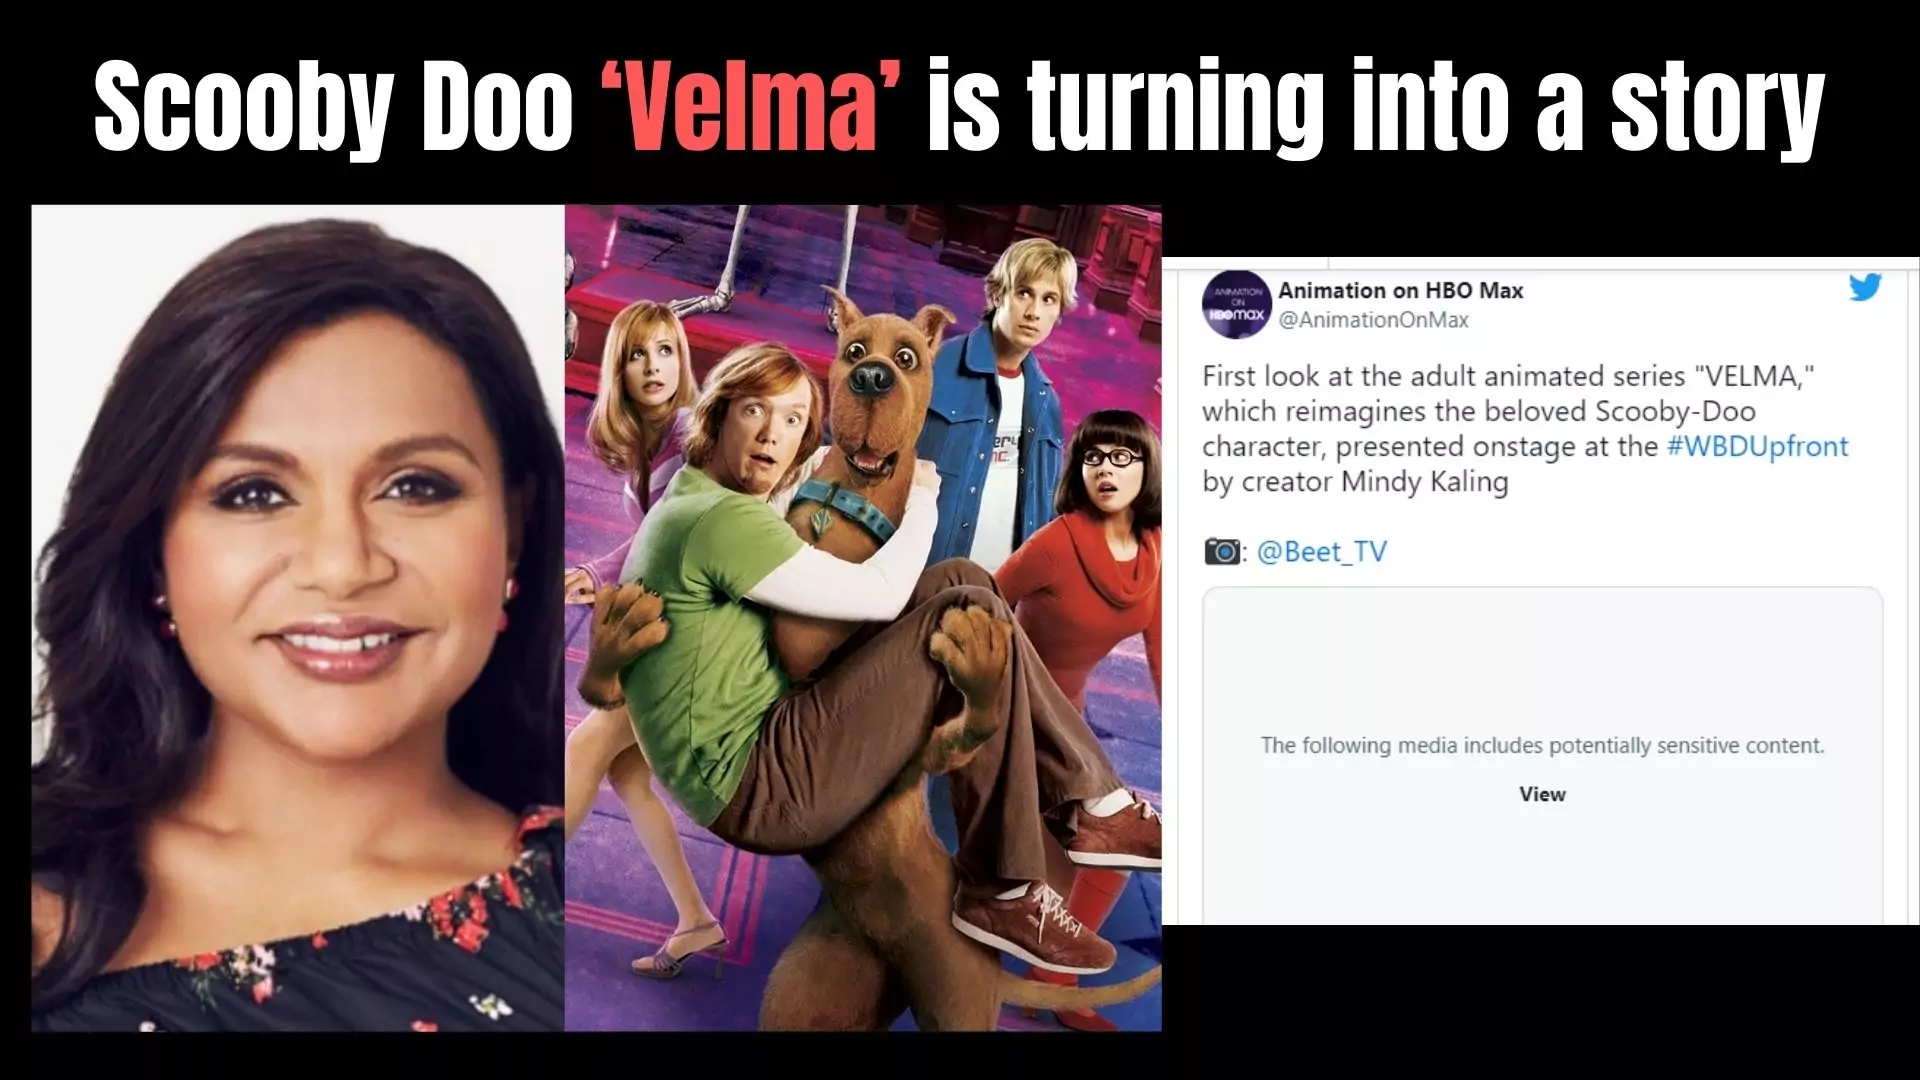 Scooby Doo ‘Velma’ is turning into a story